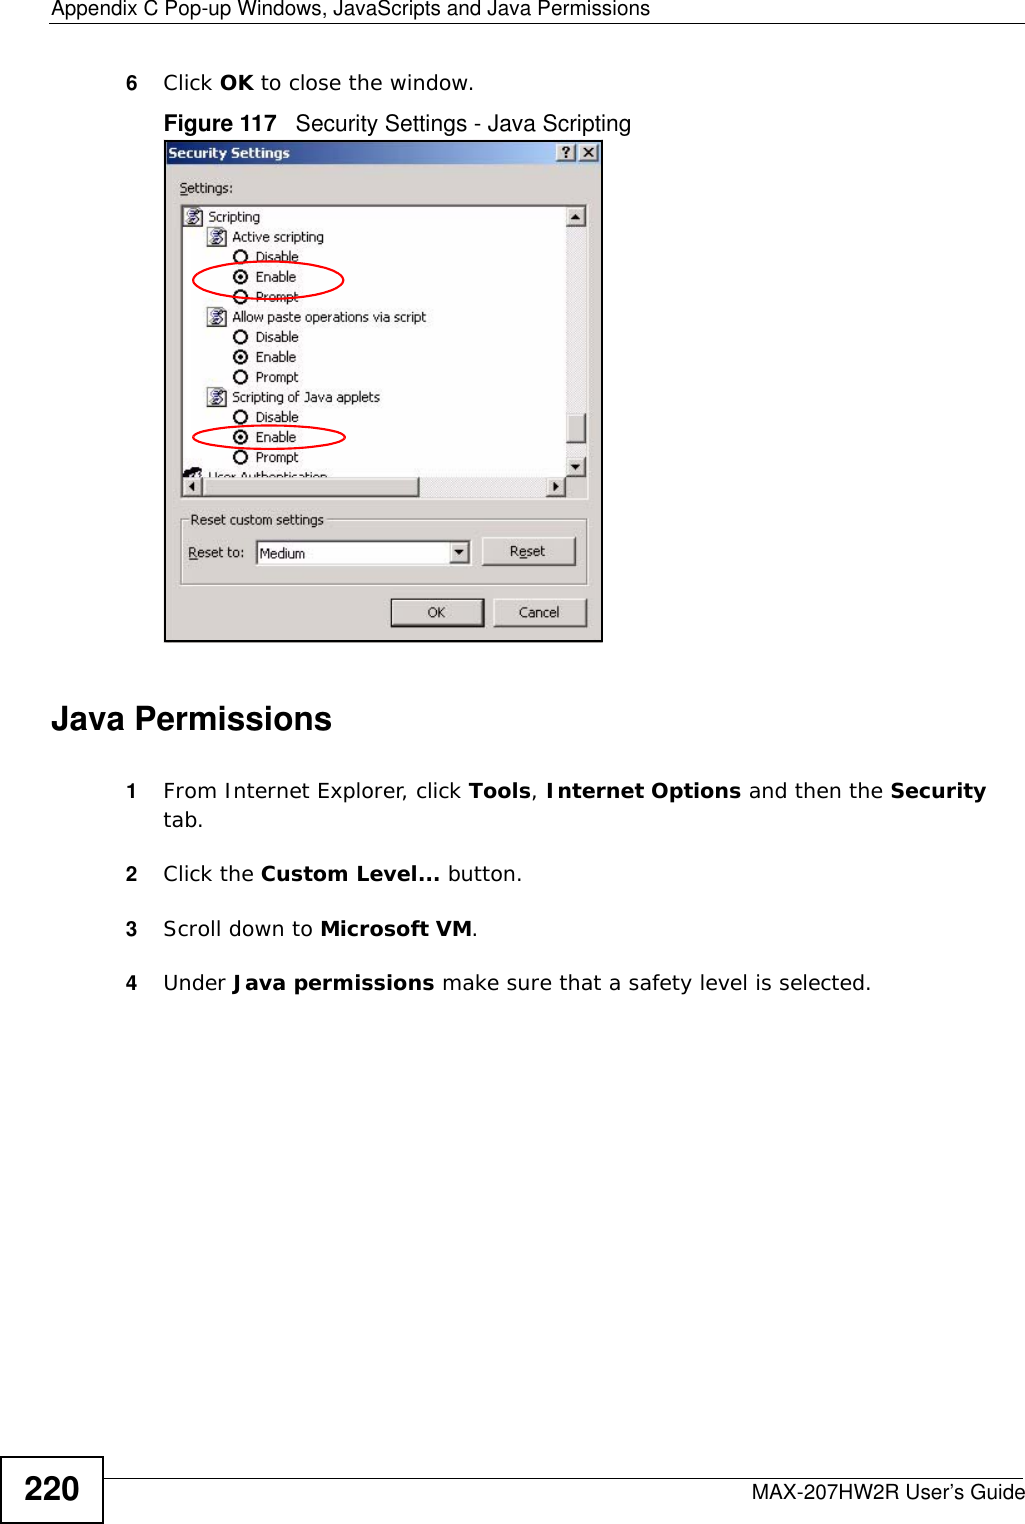 Appendix C Pop-up Windows, JavaScripts and Java PermissionsMAX-207HW2R User’s Guide2206Click OK to close the window.Figure 117   Security Settings - Java ScriptingJava Permissions1From Internet Explorer, click Tools, Internet Options and then the Security tab. 2Click the Custom Level... button. 3Scroll down to Microsoft VM. 4Under Java permissions make sure that a safety level is selected.